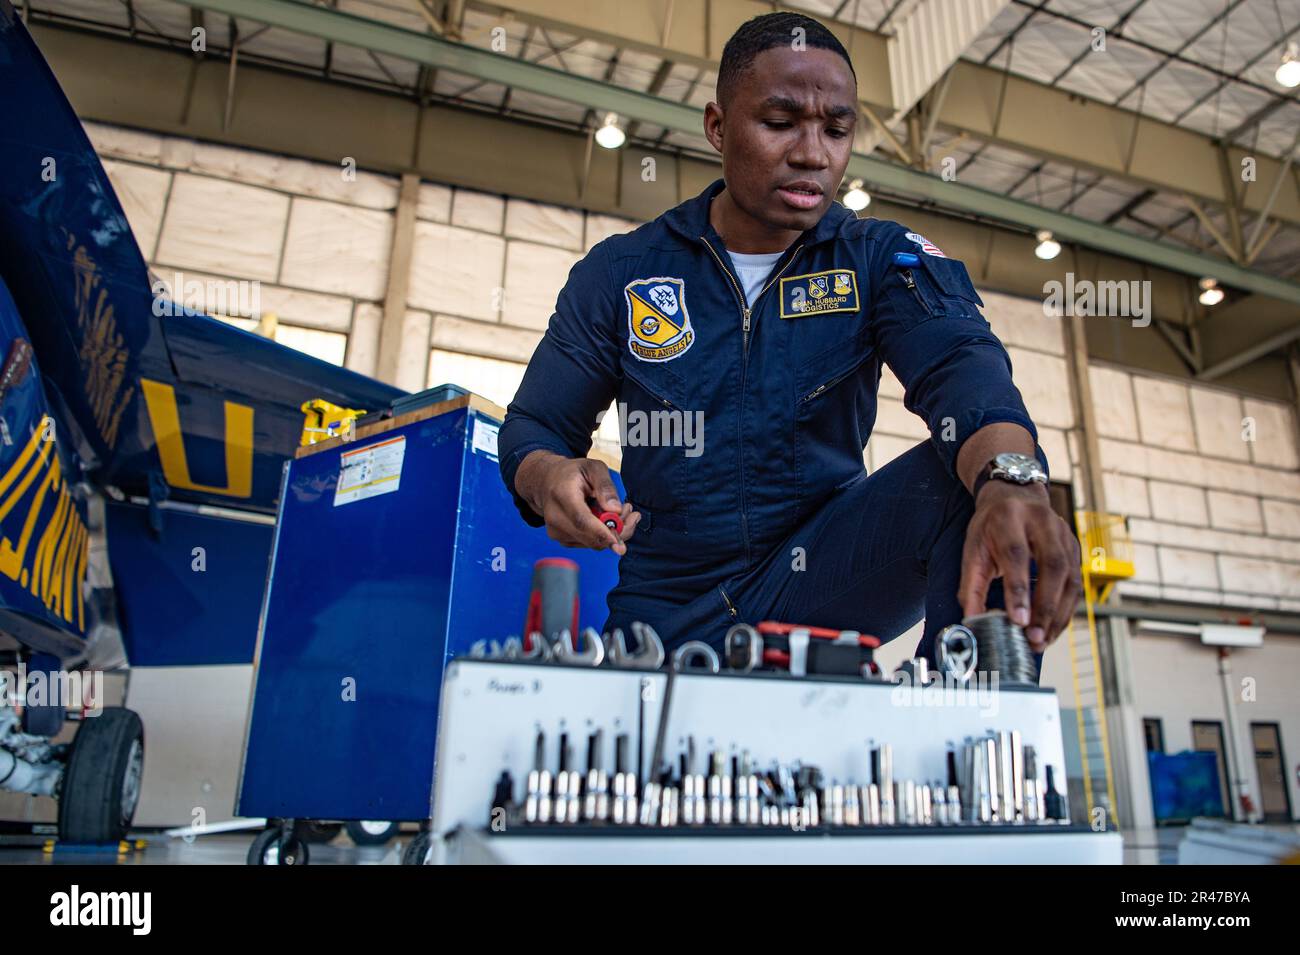 230202-N-DM308-5653 EL CENTRO, Calif. (Feb. 2, 2023) Logistics Specialist 2nd Class Brian Hubbard, assigned to the U.S. Navy Flight Demonstration Squadron, the Blue Angels, takes inventory of tools onboard Naval Air Facility (NAF) El Centro. The Blue Angels are currently conducting winter training at NAF El Centro, California, in preparation for the upcoming 2023 air show season. Stock Photo